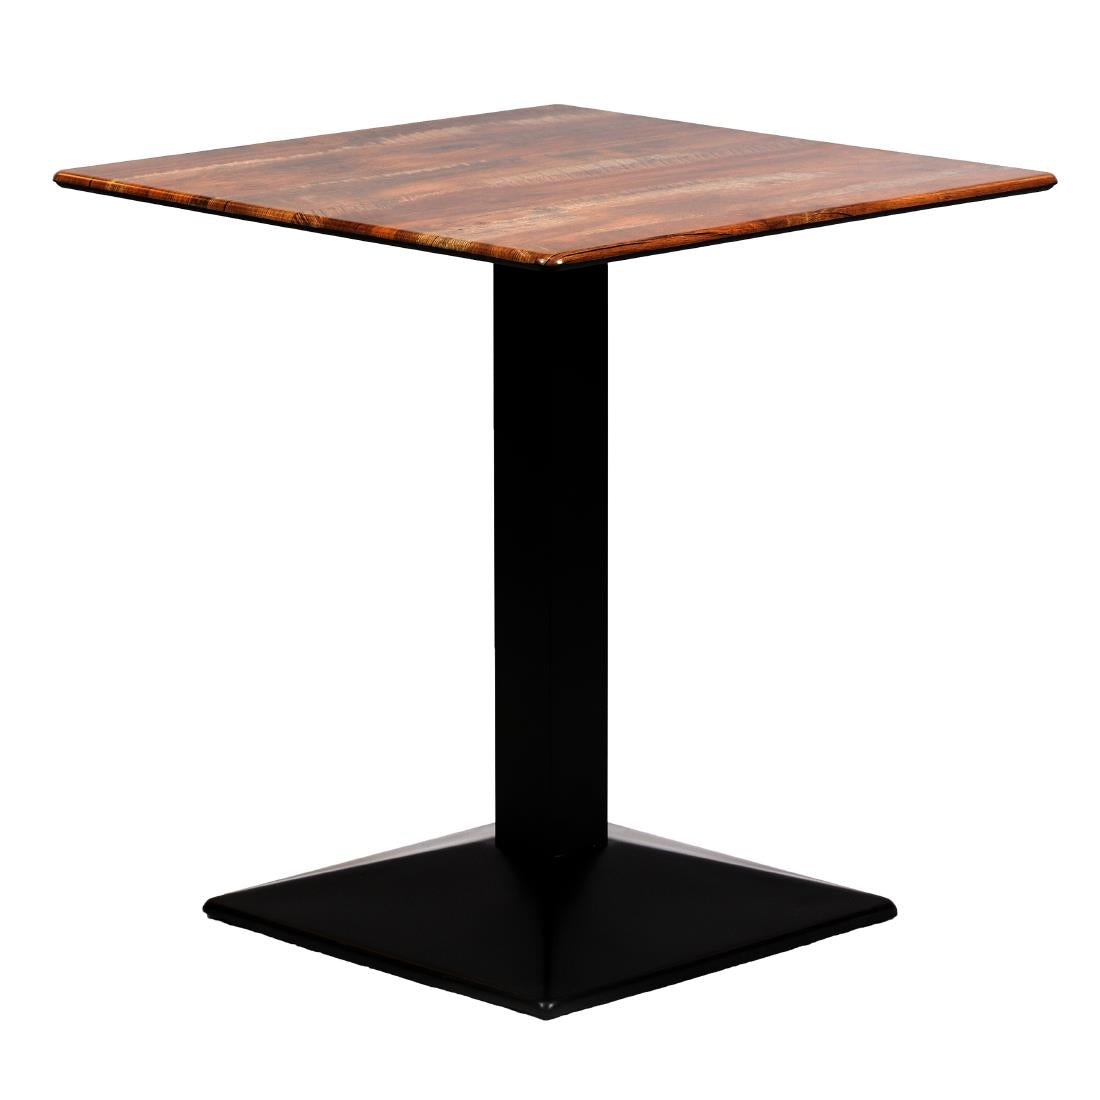 CZ812 Turin Metal Base Square Dining Table with Laminate Top Planked Oak 600mm JD Catering Equipment Solutions Ltd